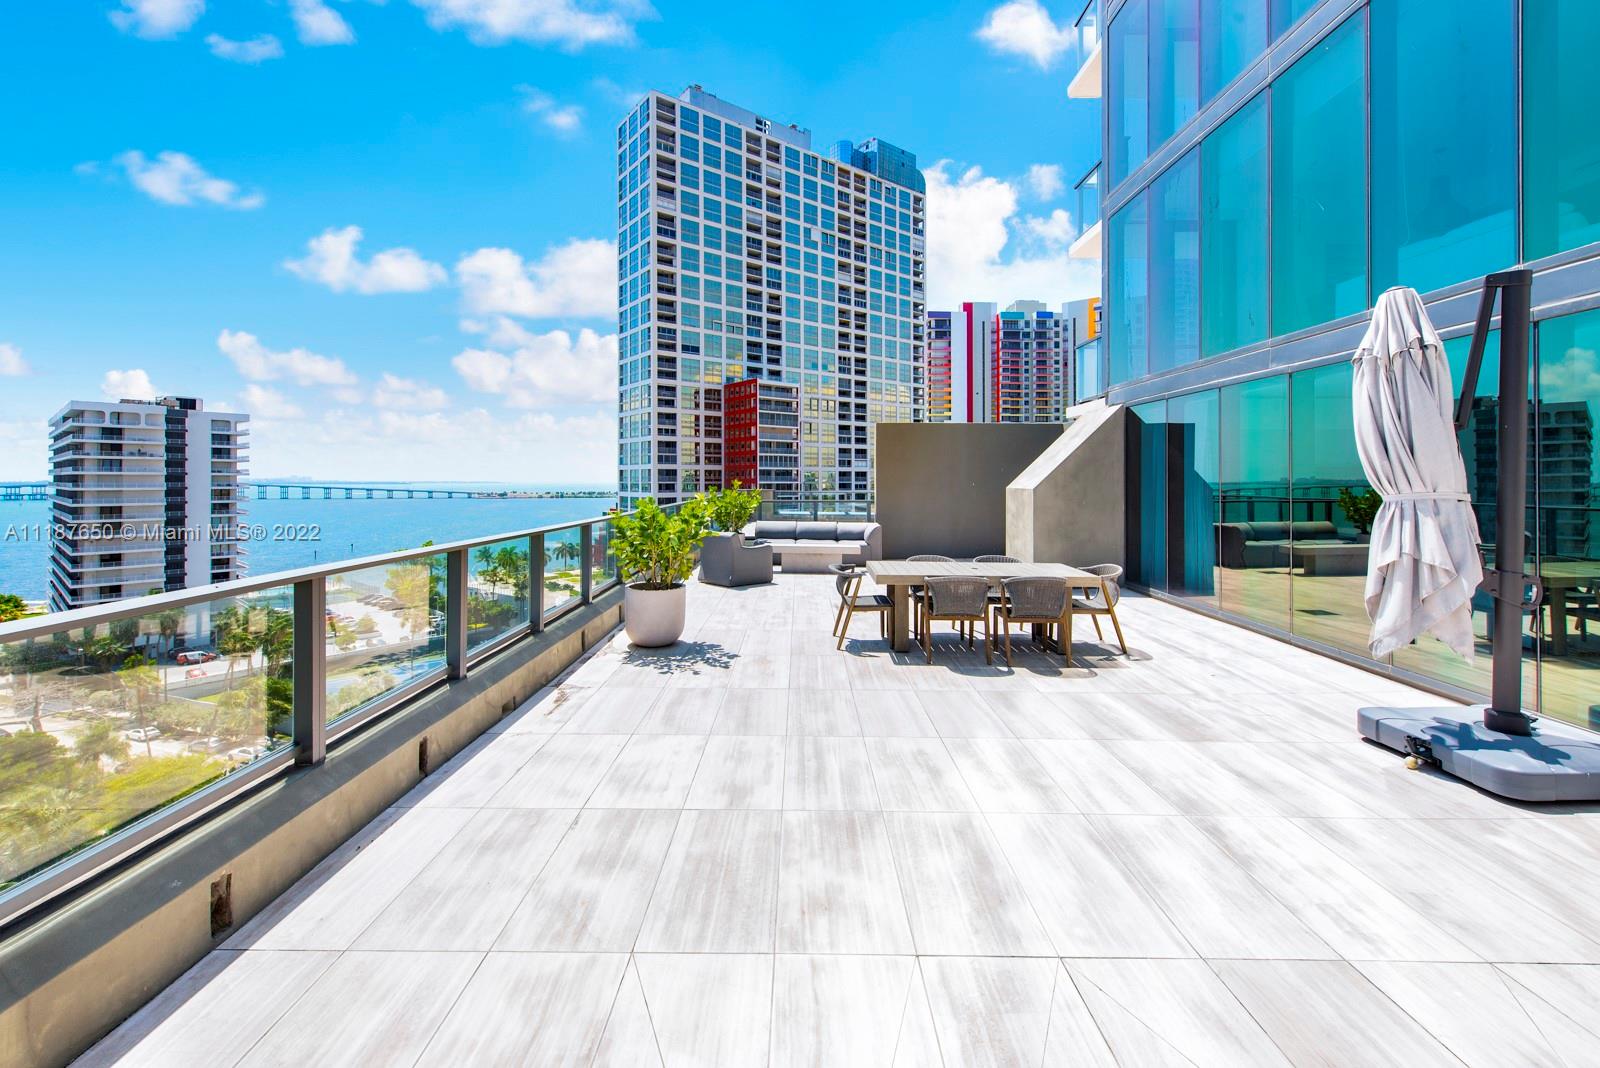 Unique one of a kind One bedroom plus Den with immense Terrace overlooking the Bay and City. The huge patio is the perfect place to entertain and host your guest with its built-in summer kitchen and BBQ.. Apt is equipped with beautiful striped Zebra marbles floors throughout entire unit, Top of the line upgraded appliances. Apple ready home technology and floor to ceiling windows. ECHO Brickell is an exclusive boutique luxury building with cutting edge parking system, Infinity-edge pool, 4000 sq ft state of the art fitness center and Spa deck with panoramic views designed by Carlos Ott. Walking distance to bars, restaurants, night life, Brickell City Center and Mary Brickell Village and much more.